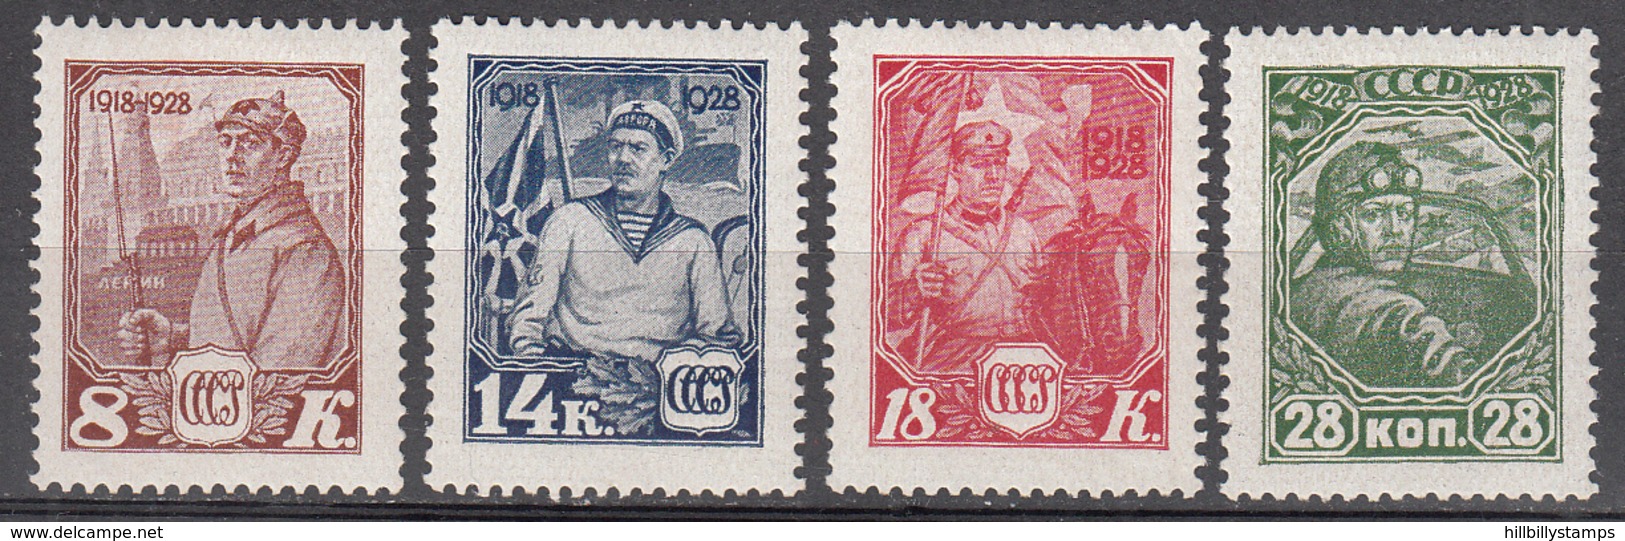 RUSSIA       SCOTT NO.  402-5     MINT HINGED    YEAR  1928 - Unused Stamps